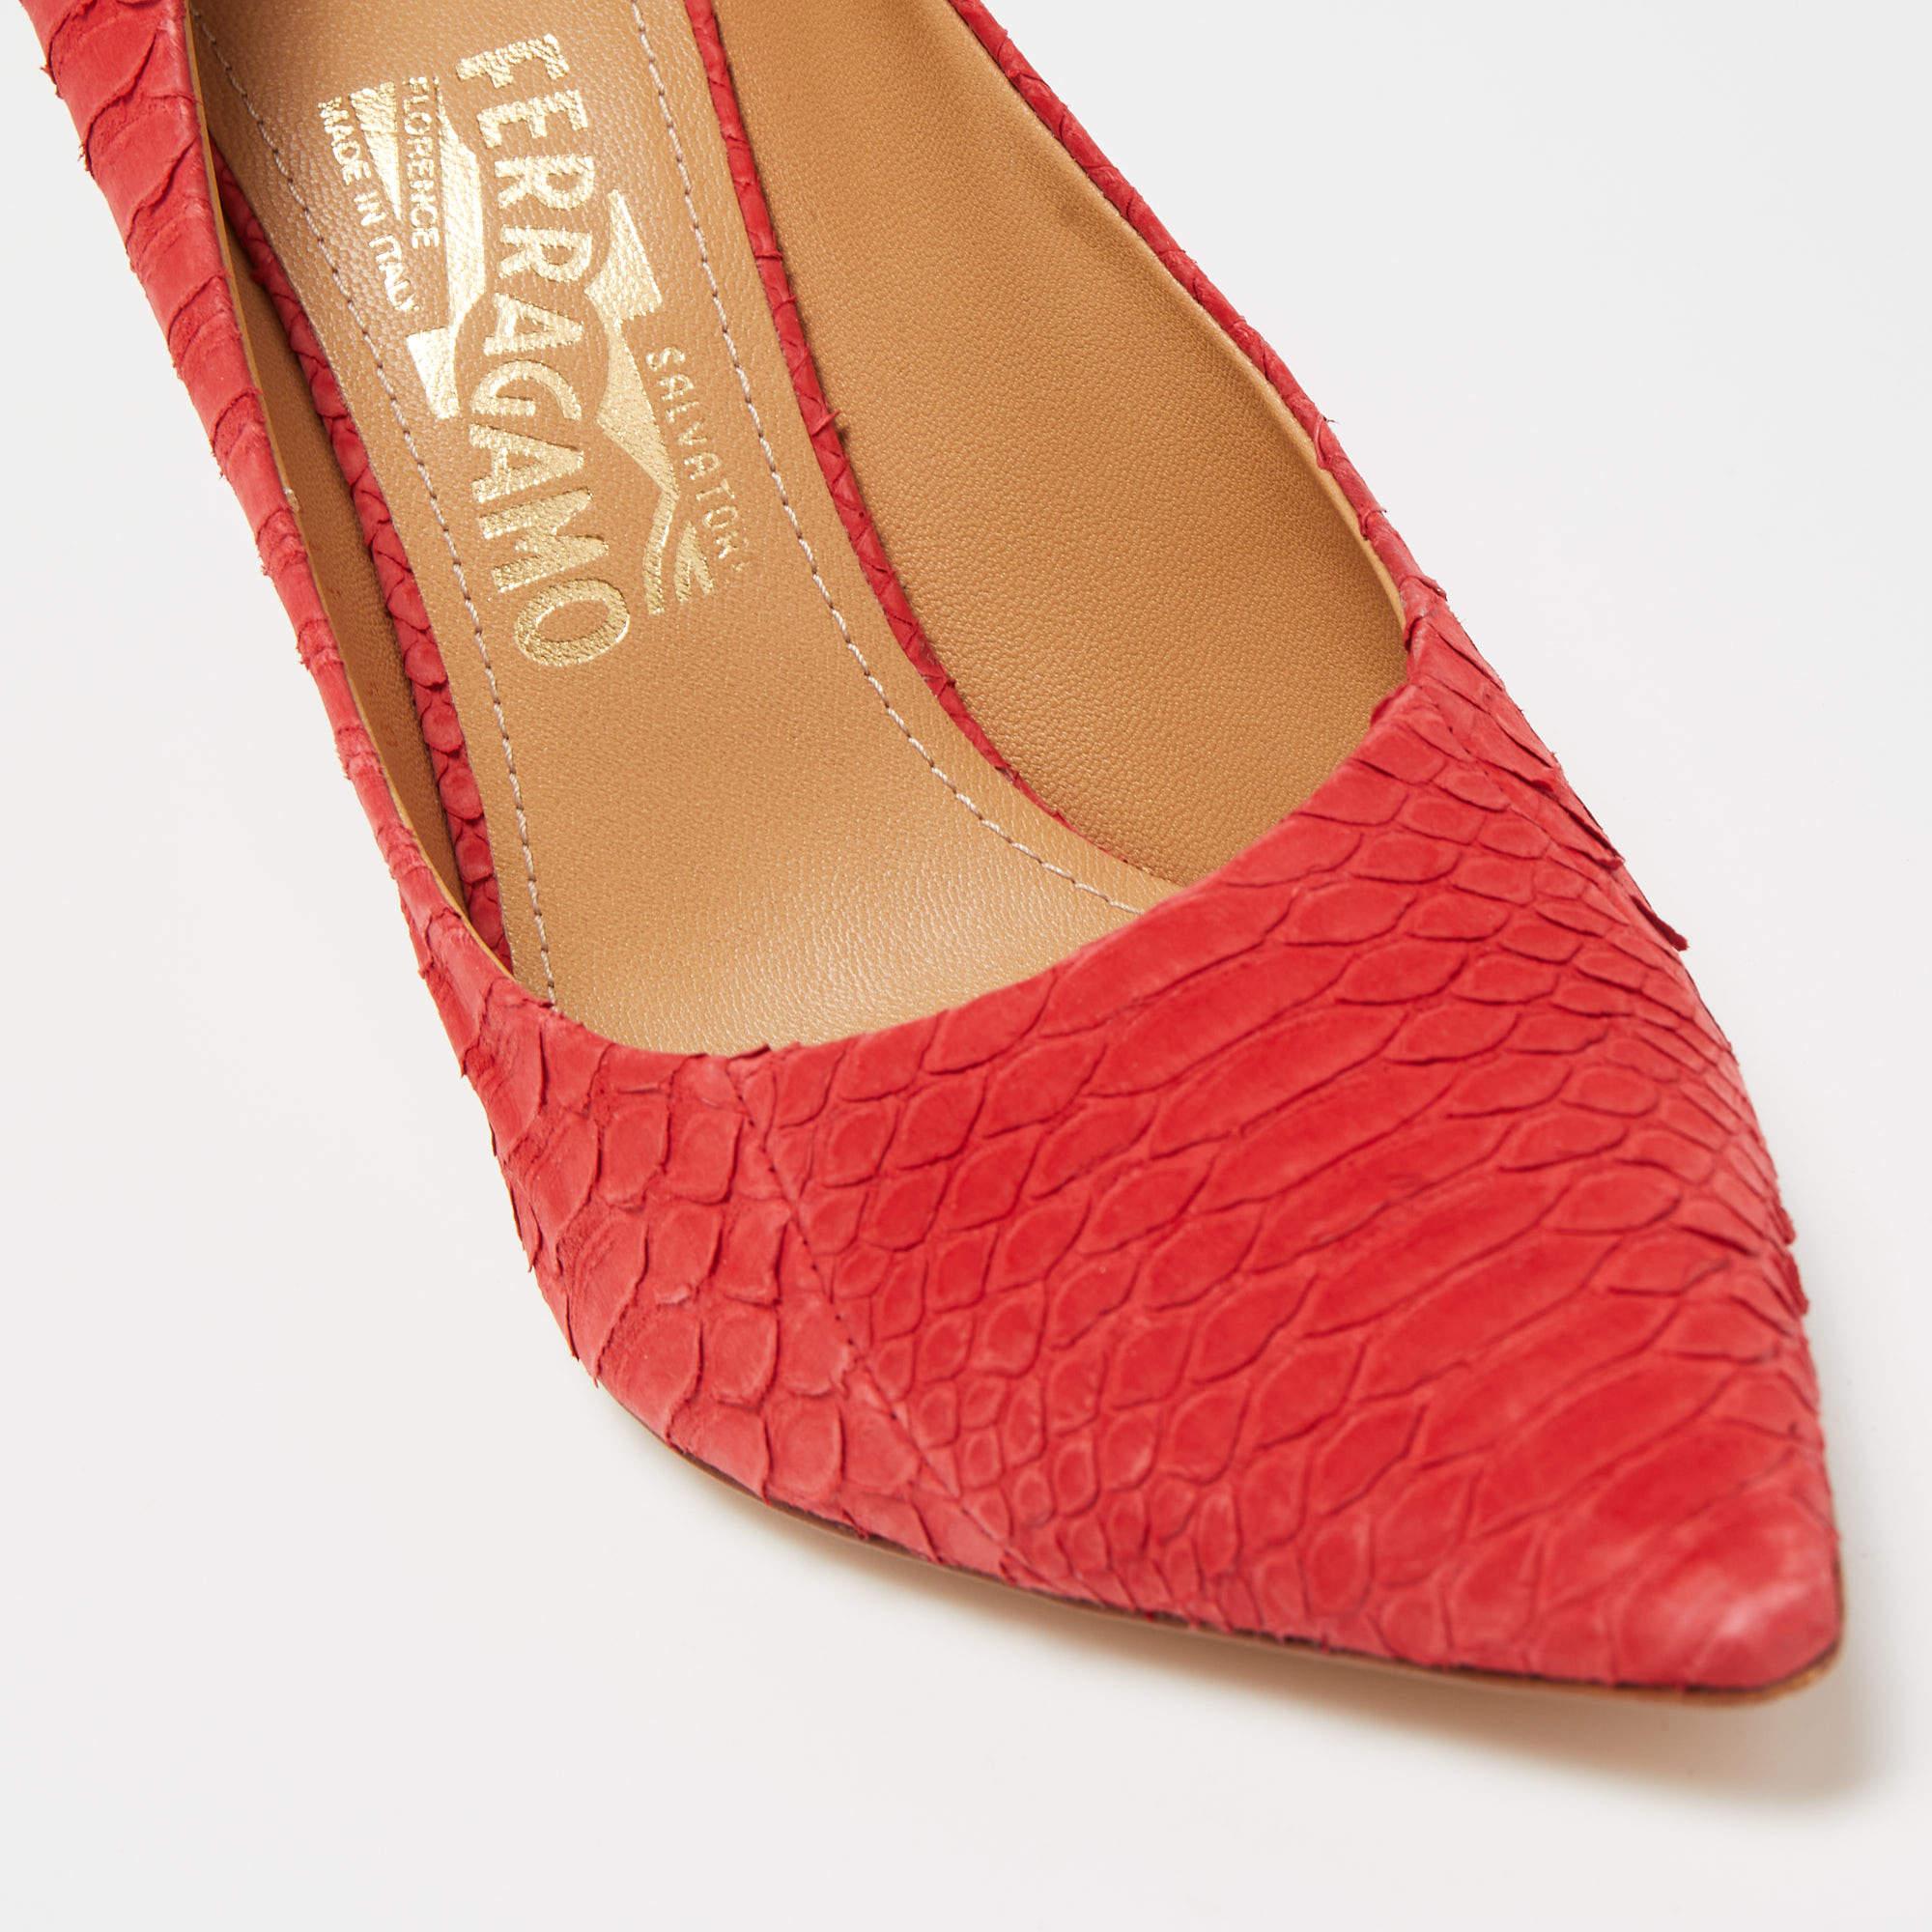 The Salvatore Ferragamo pumps are luxurious and stylish women's shoes. Crafted with red python skin, they feature a pointed-toe design, and a slim stiletto heel, exuding timeless elegance and sophistication.

